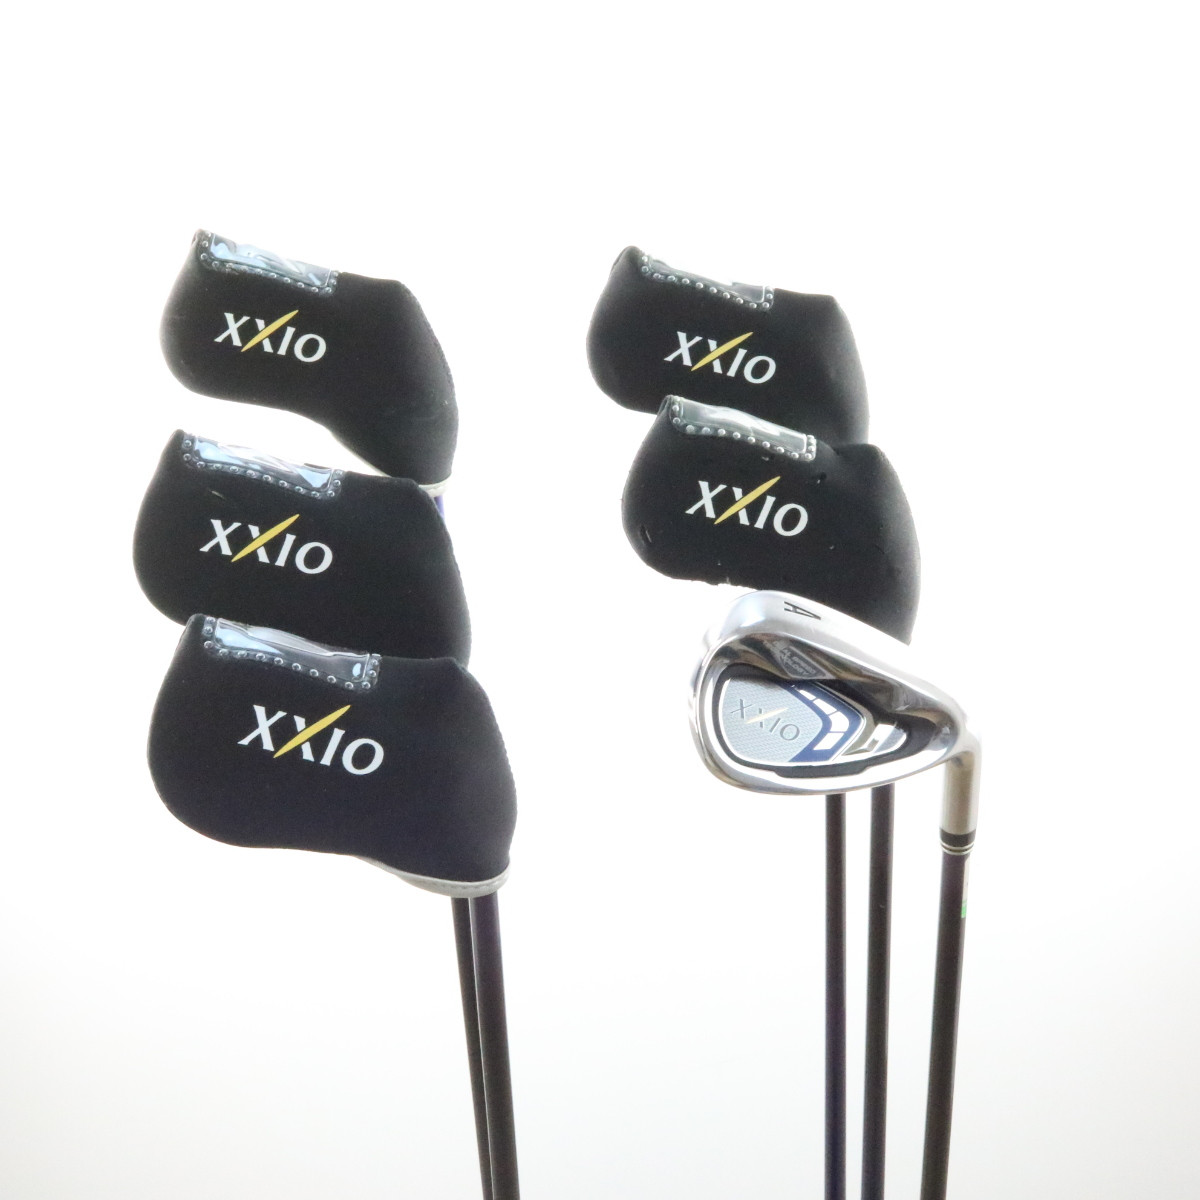 Xxio 9 Iron Set 6 P A Mp 900 Graphite Shaft Regular Right Handed 411g Mr Topes Golf